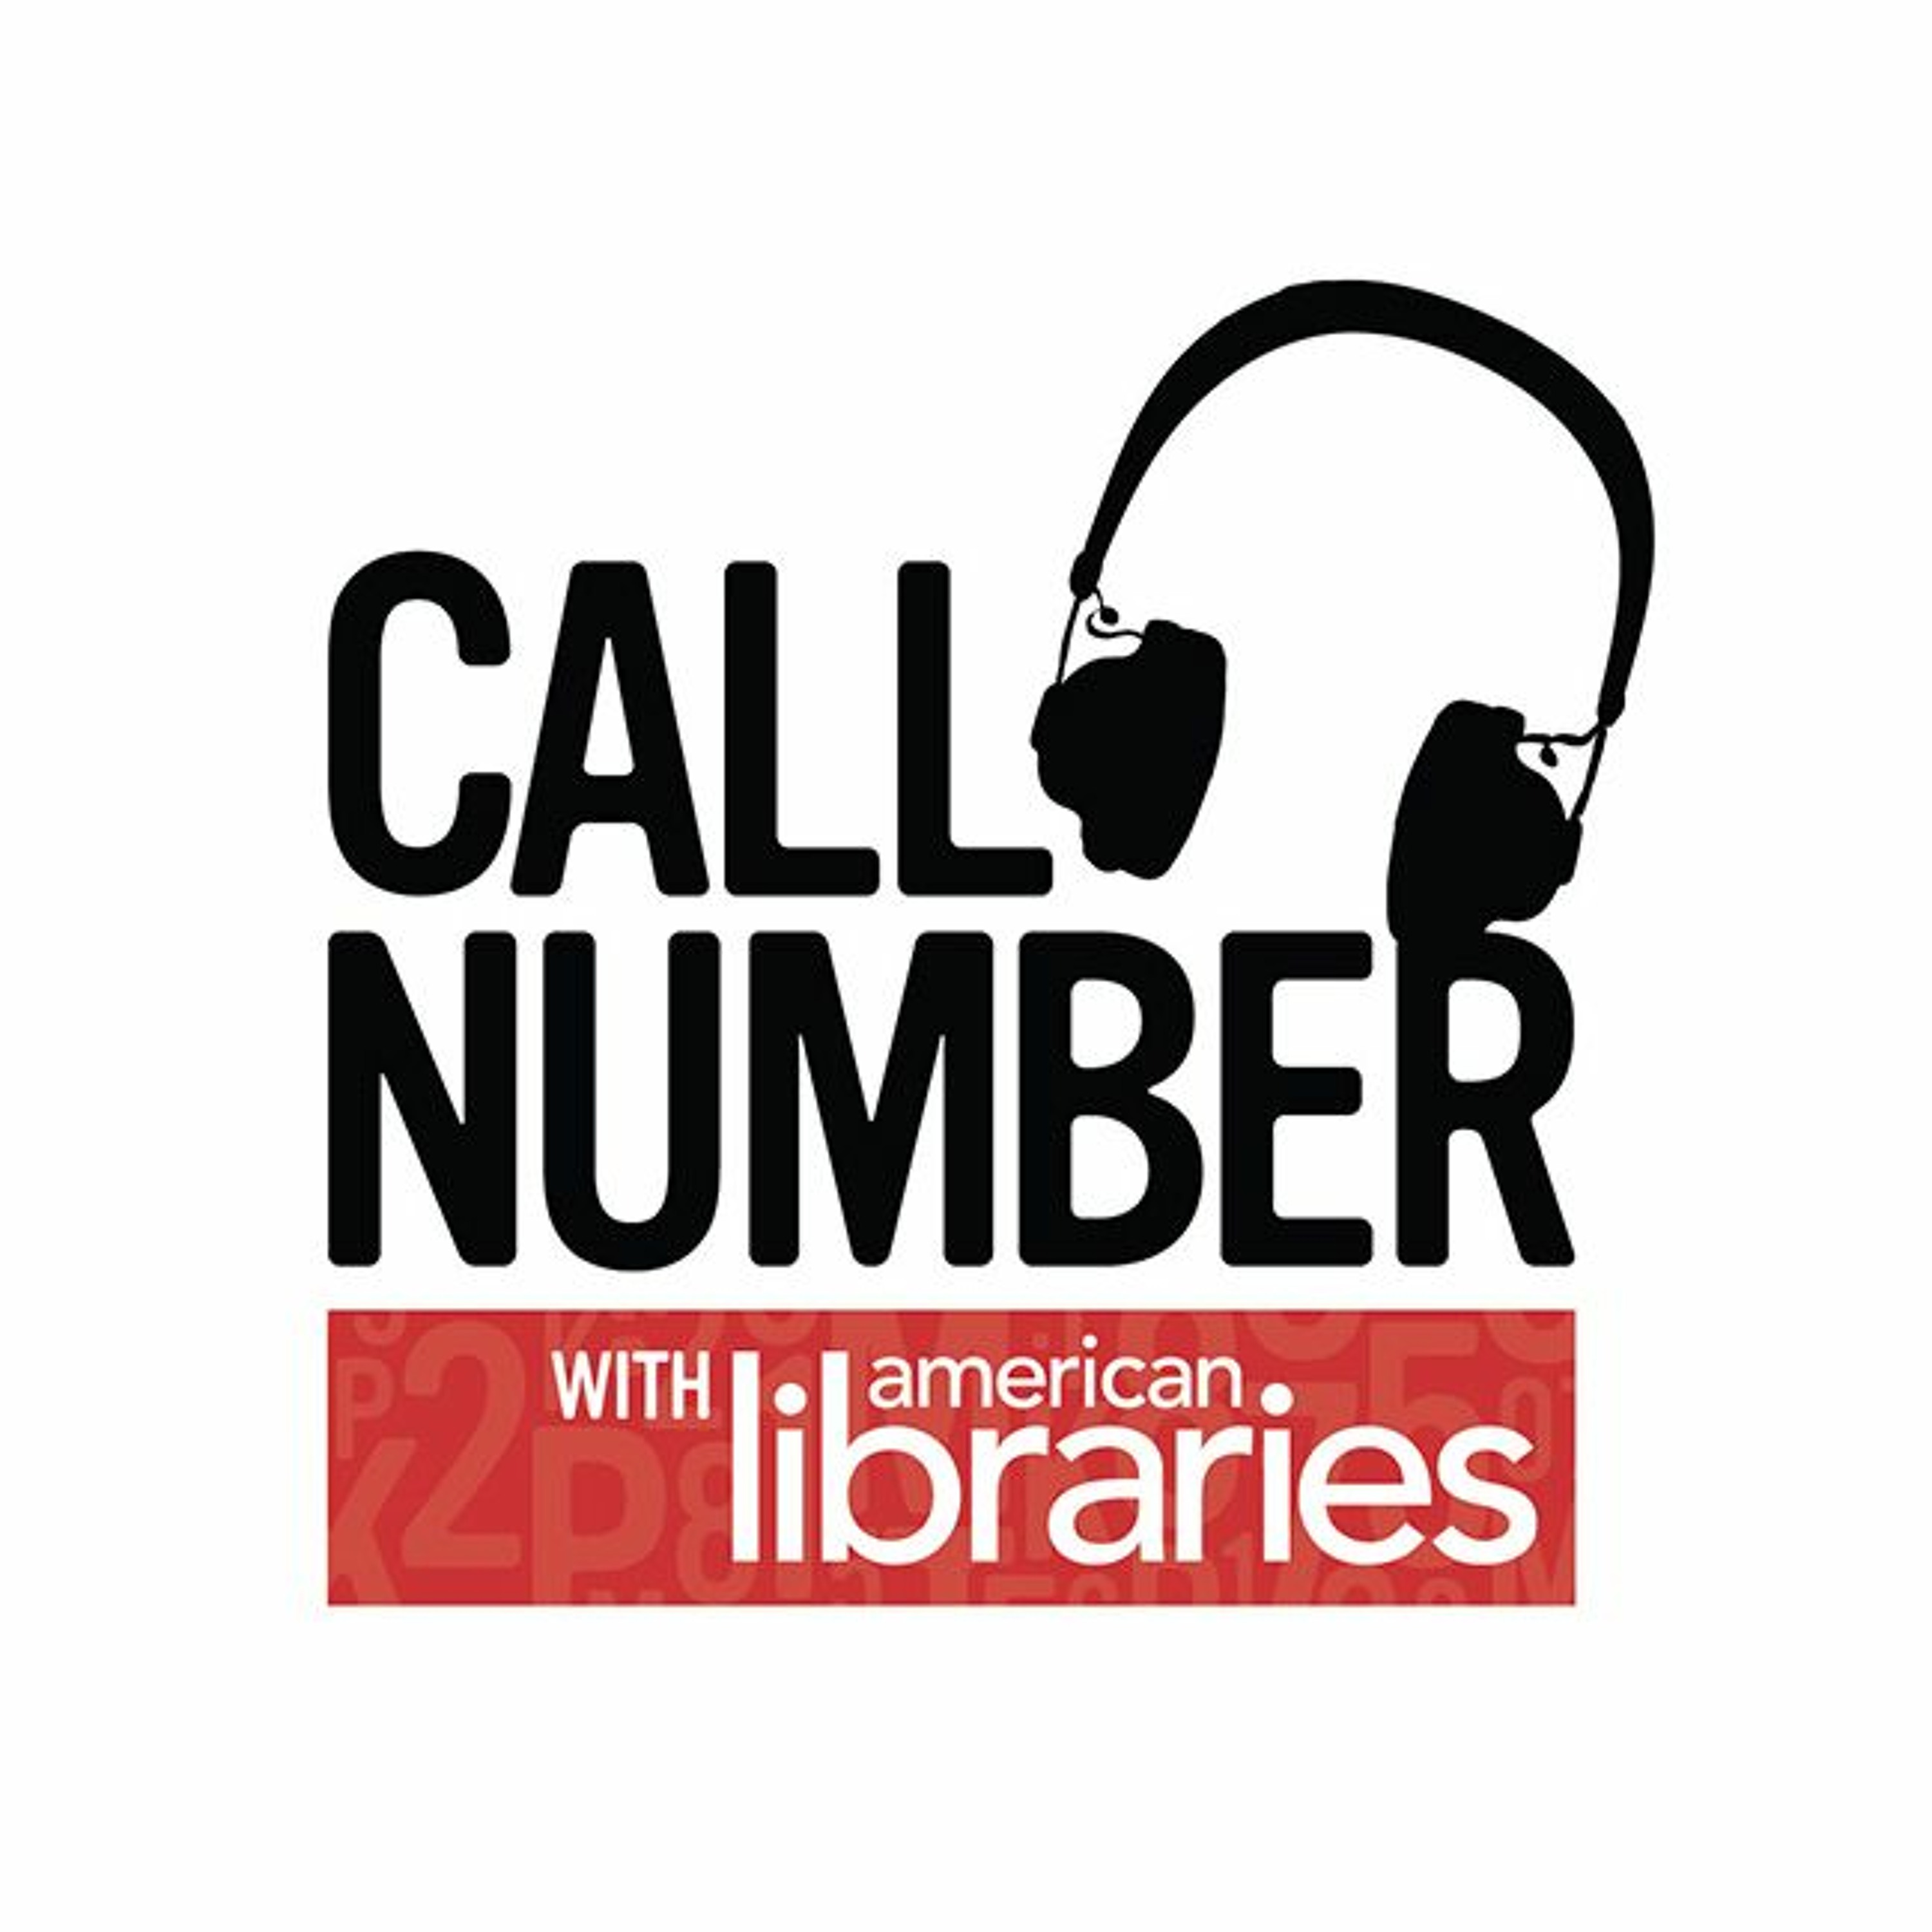 Episode 61: School Librarians Adapt to the Pandemic